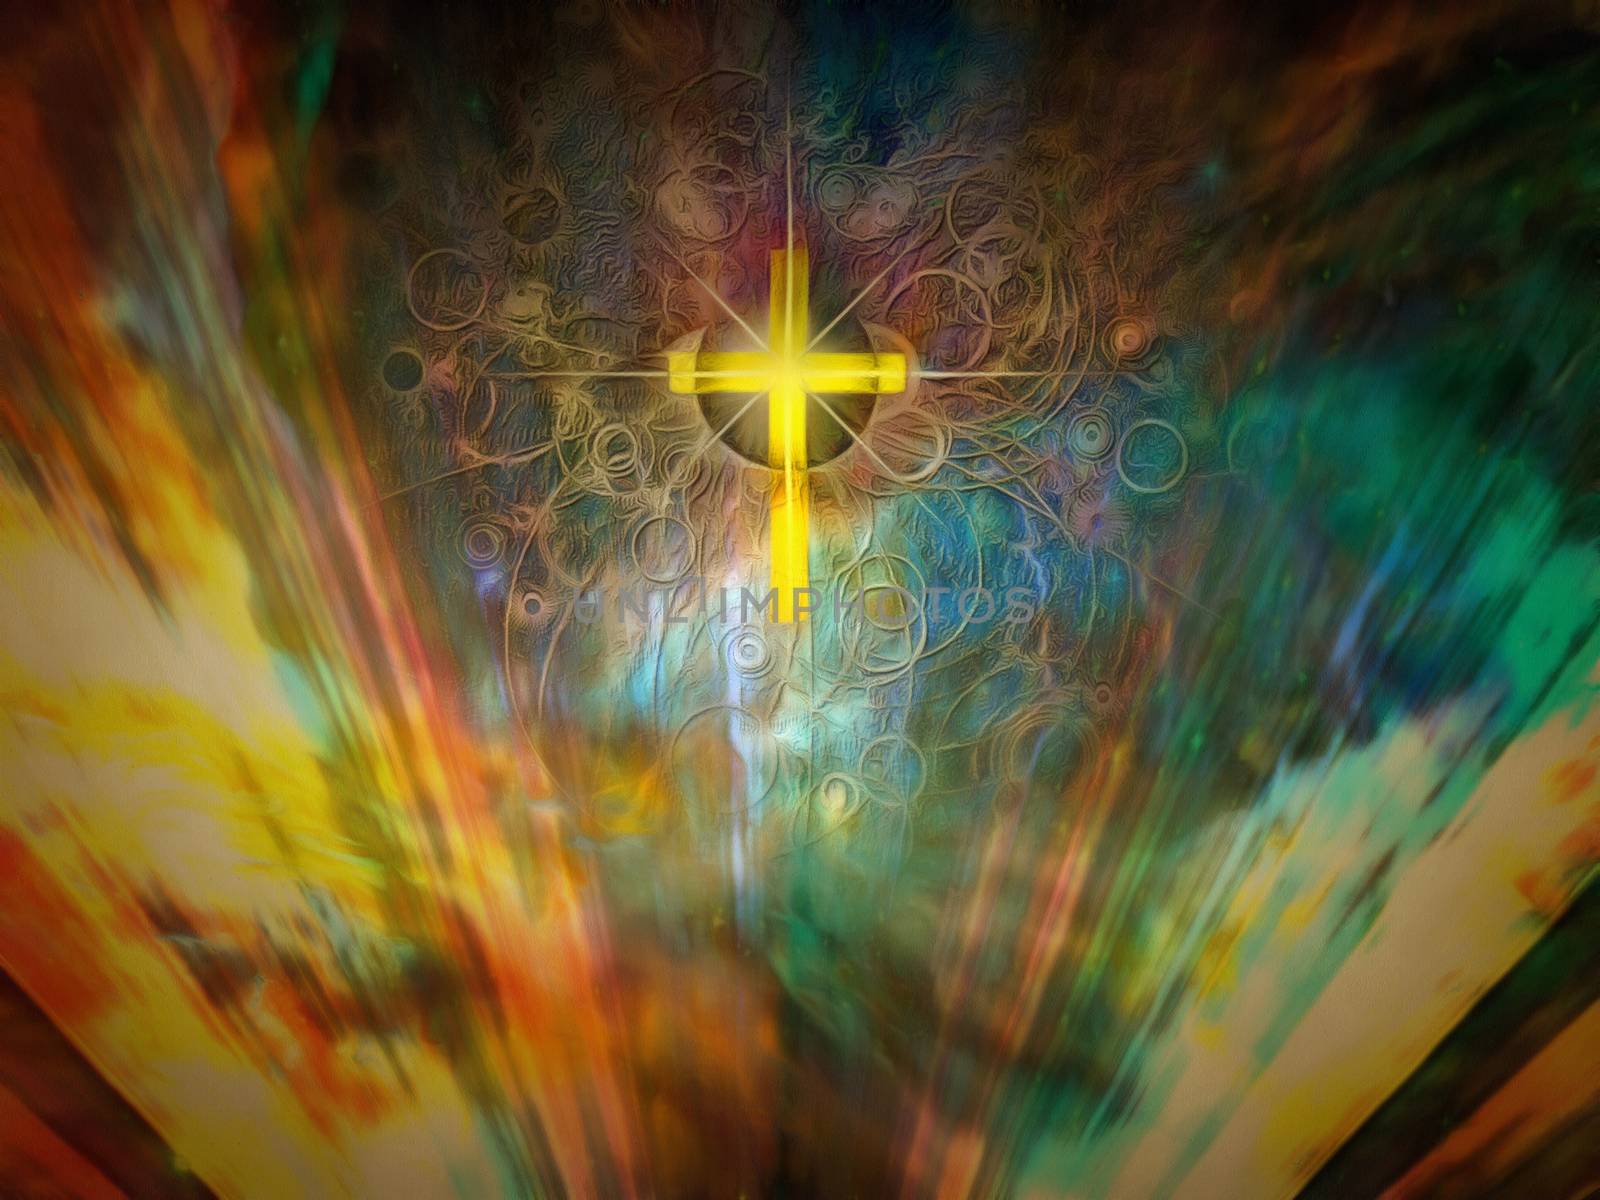 Surreal painting. Golden cross and eye of God in vivid colorful sky.